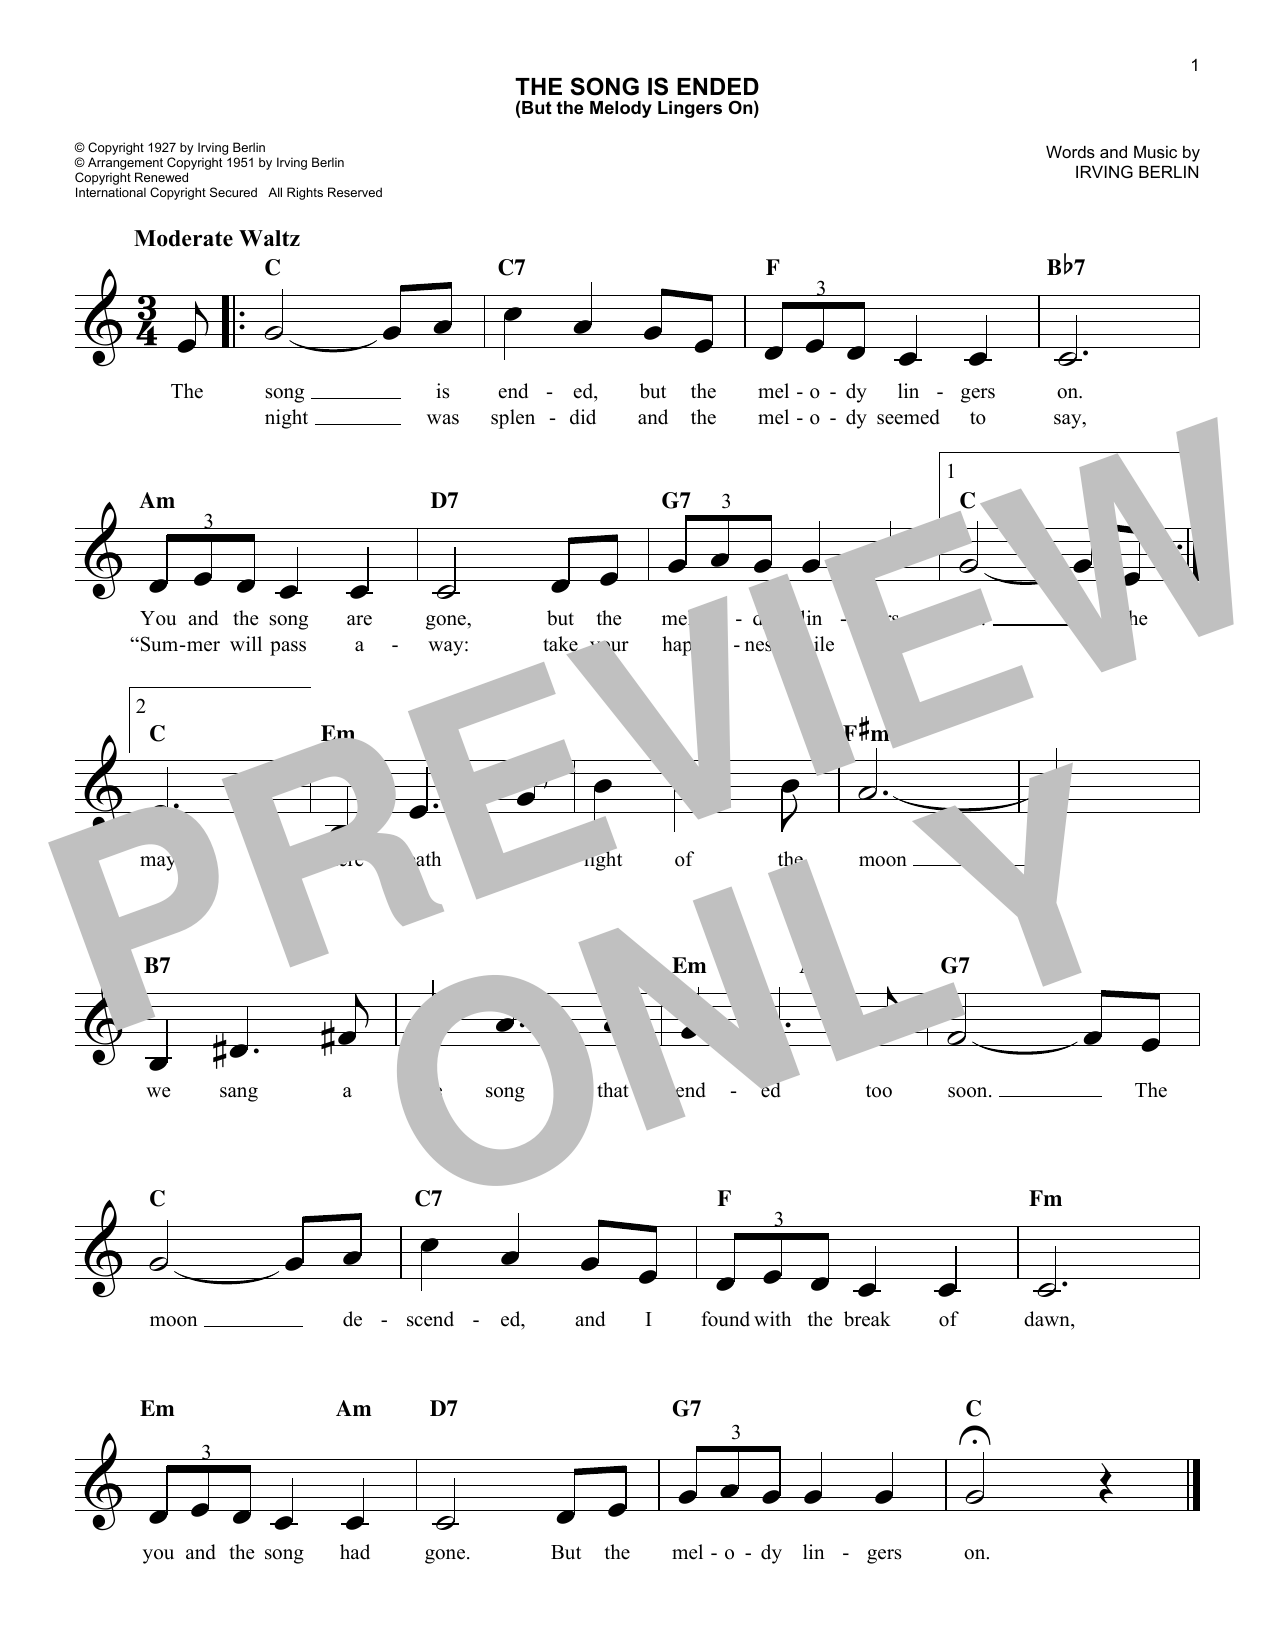 Download Irving Berlin The Song Is Ended (But The Melody Linge Sheet Music